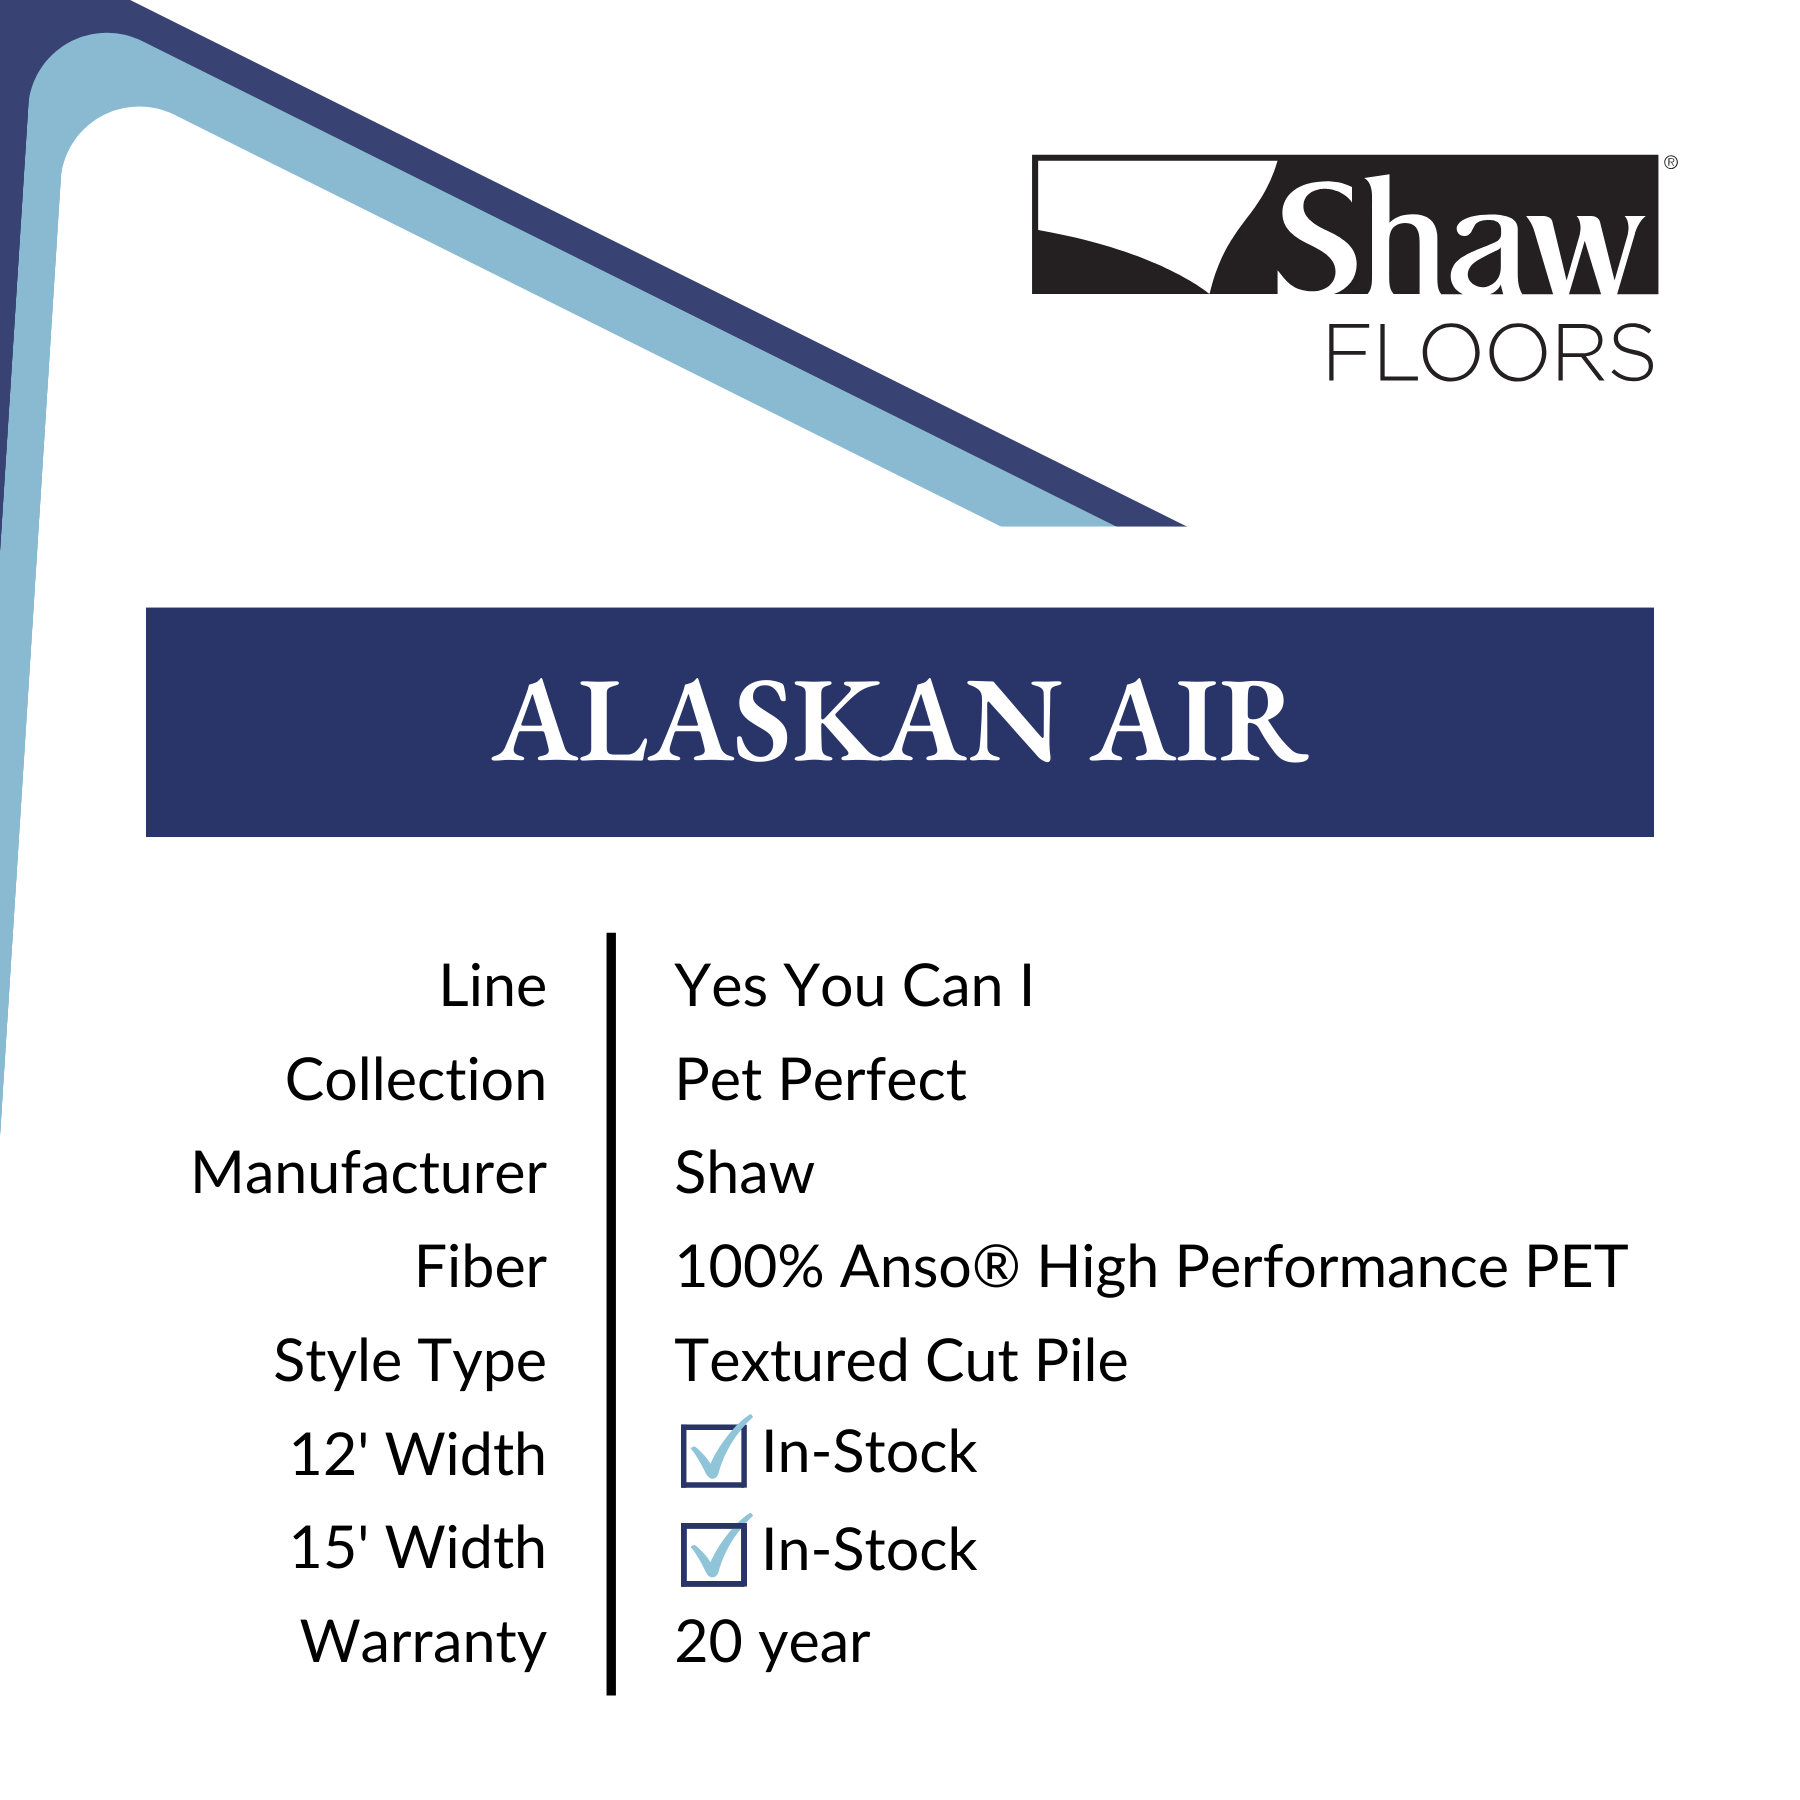 Alaskan Air Shaw Pet Perfect Plus Yes You Can I Carpet from Calhoun's Flooring Springfield IL Specs